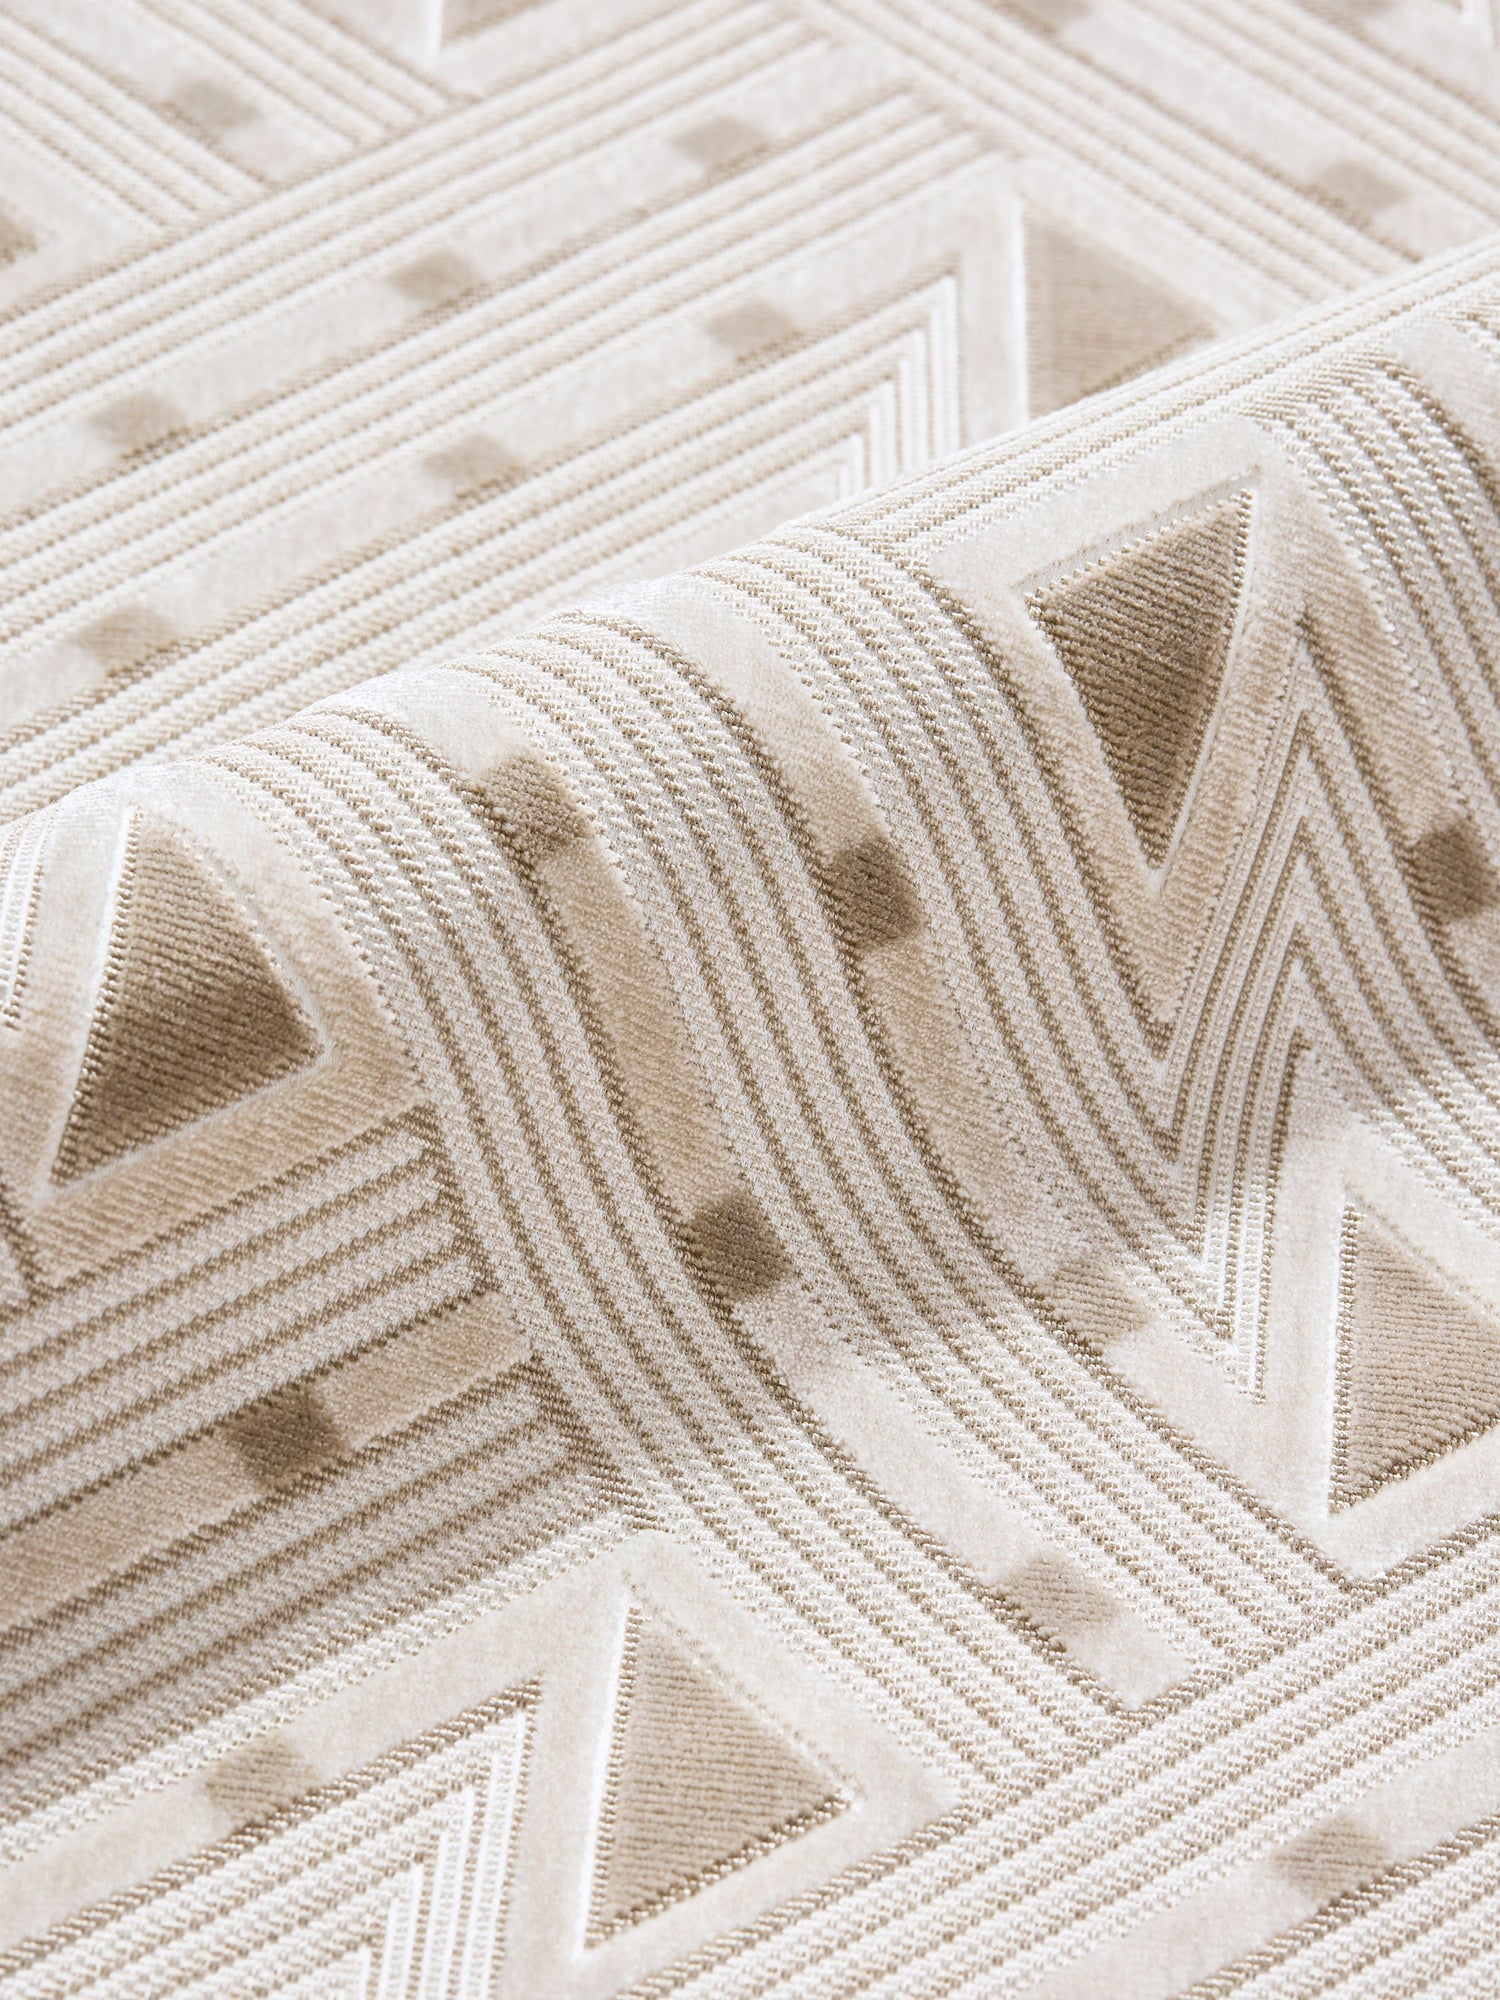 Kasai Velvet fabric in sandstone color - pattern number SC 000127323 - by Scalamandre in the Scalamandre Fabrics Book 1 collection